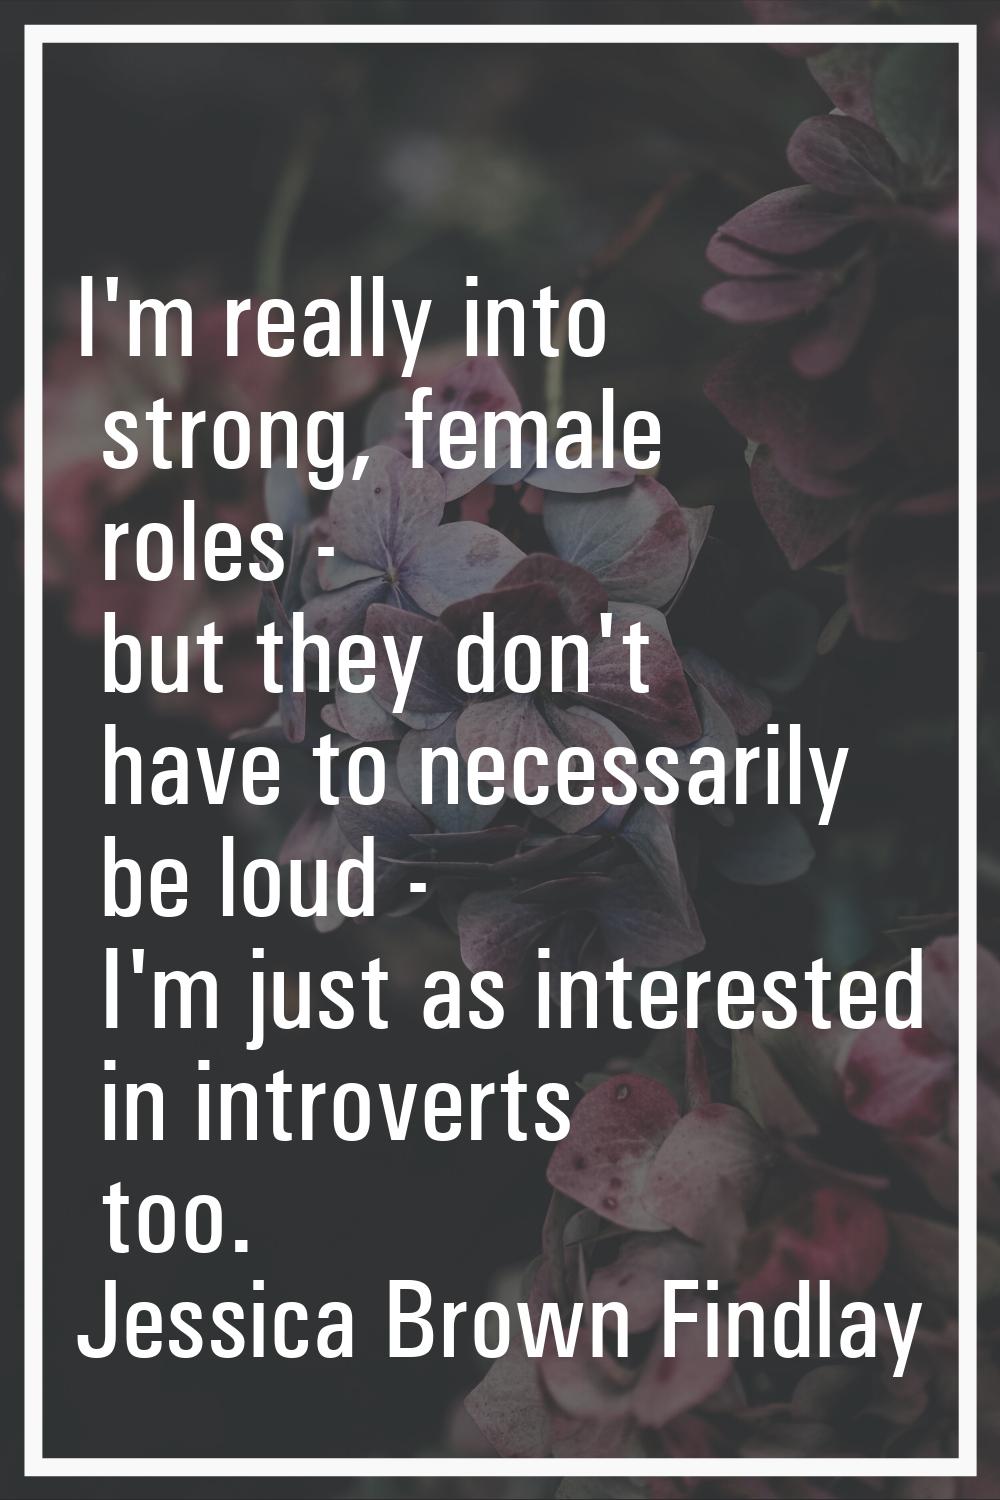 I'm really into strong, female roles - but they don't have to necessarily be loud - I'm just as int